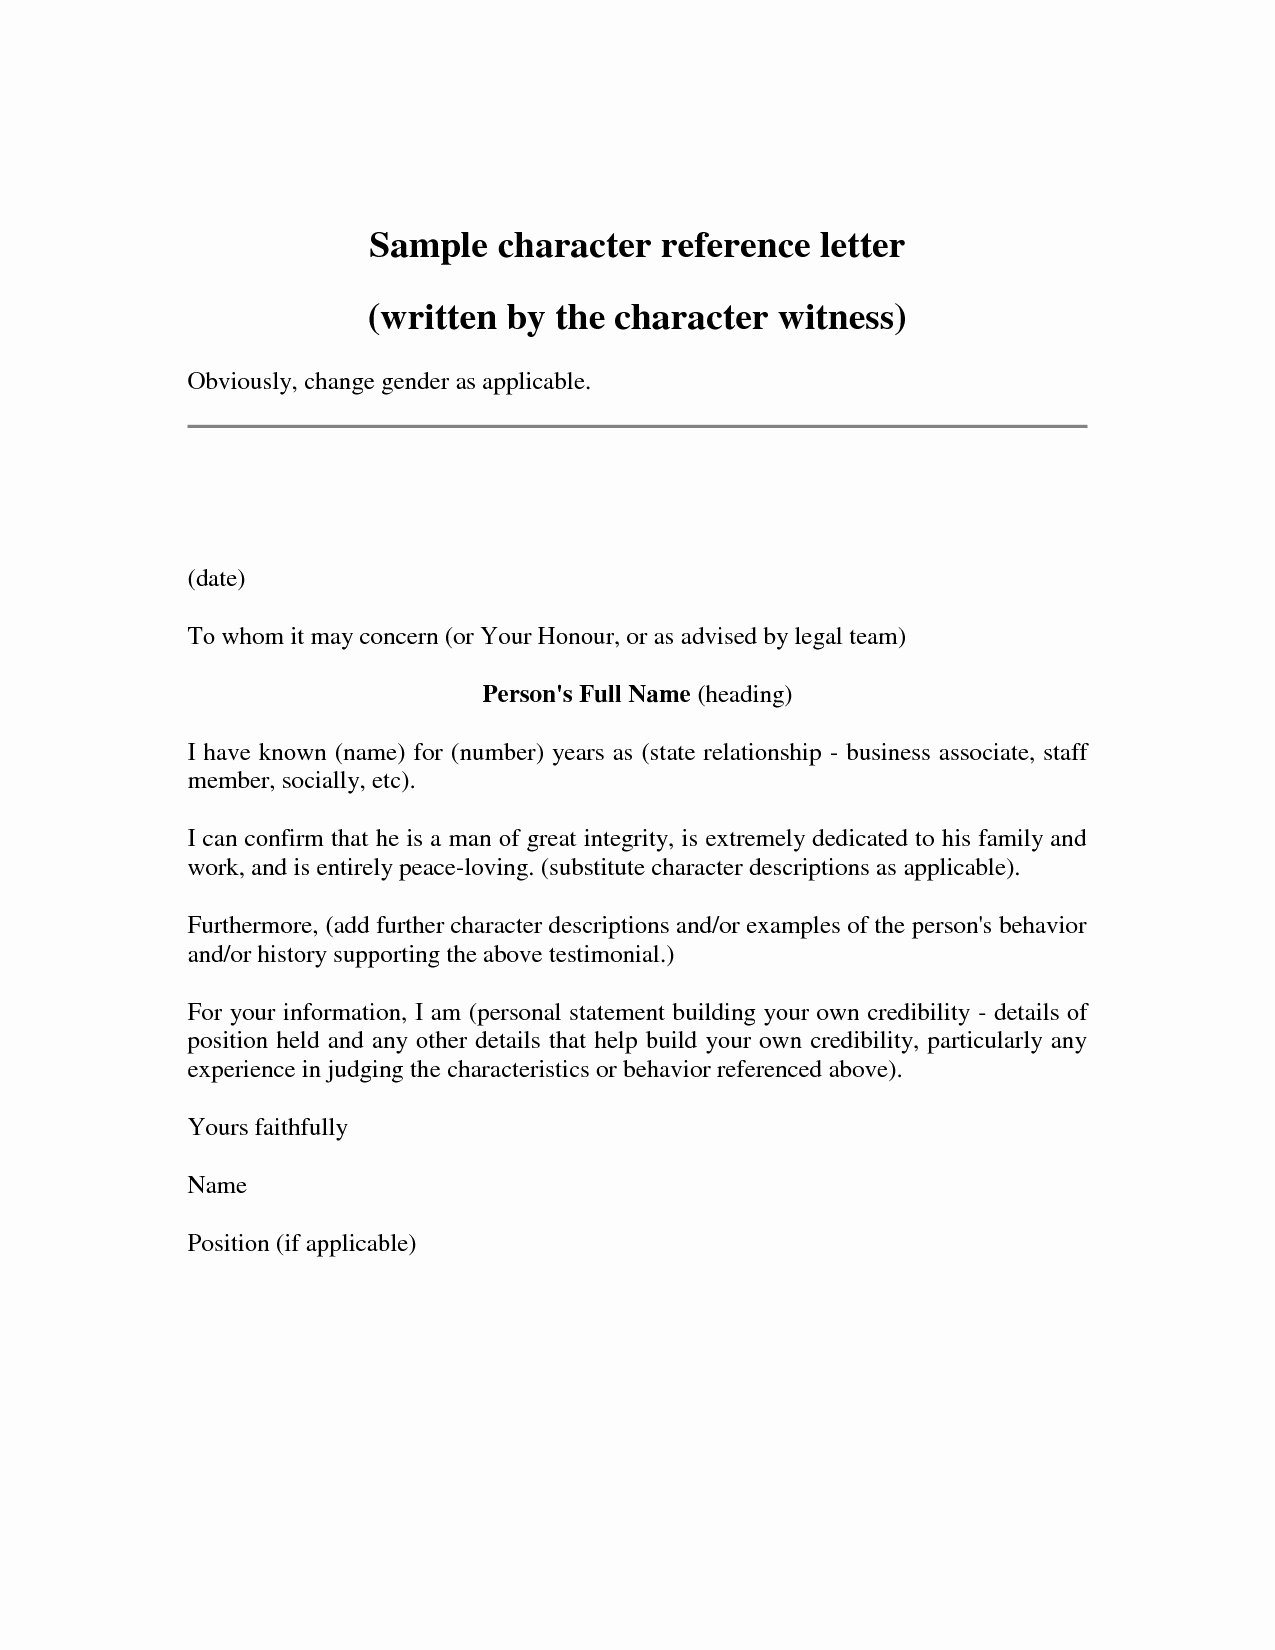 Letter to Court Template Unique Character Letters for Court Templates Google Search